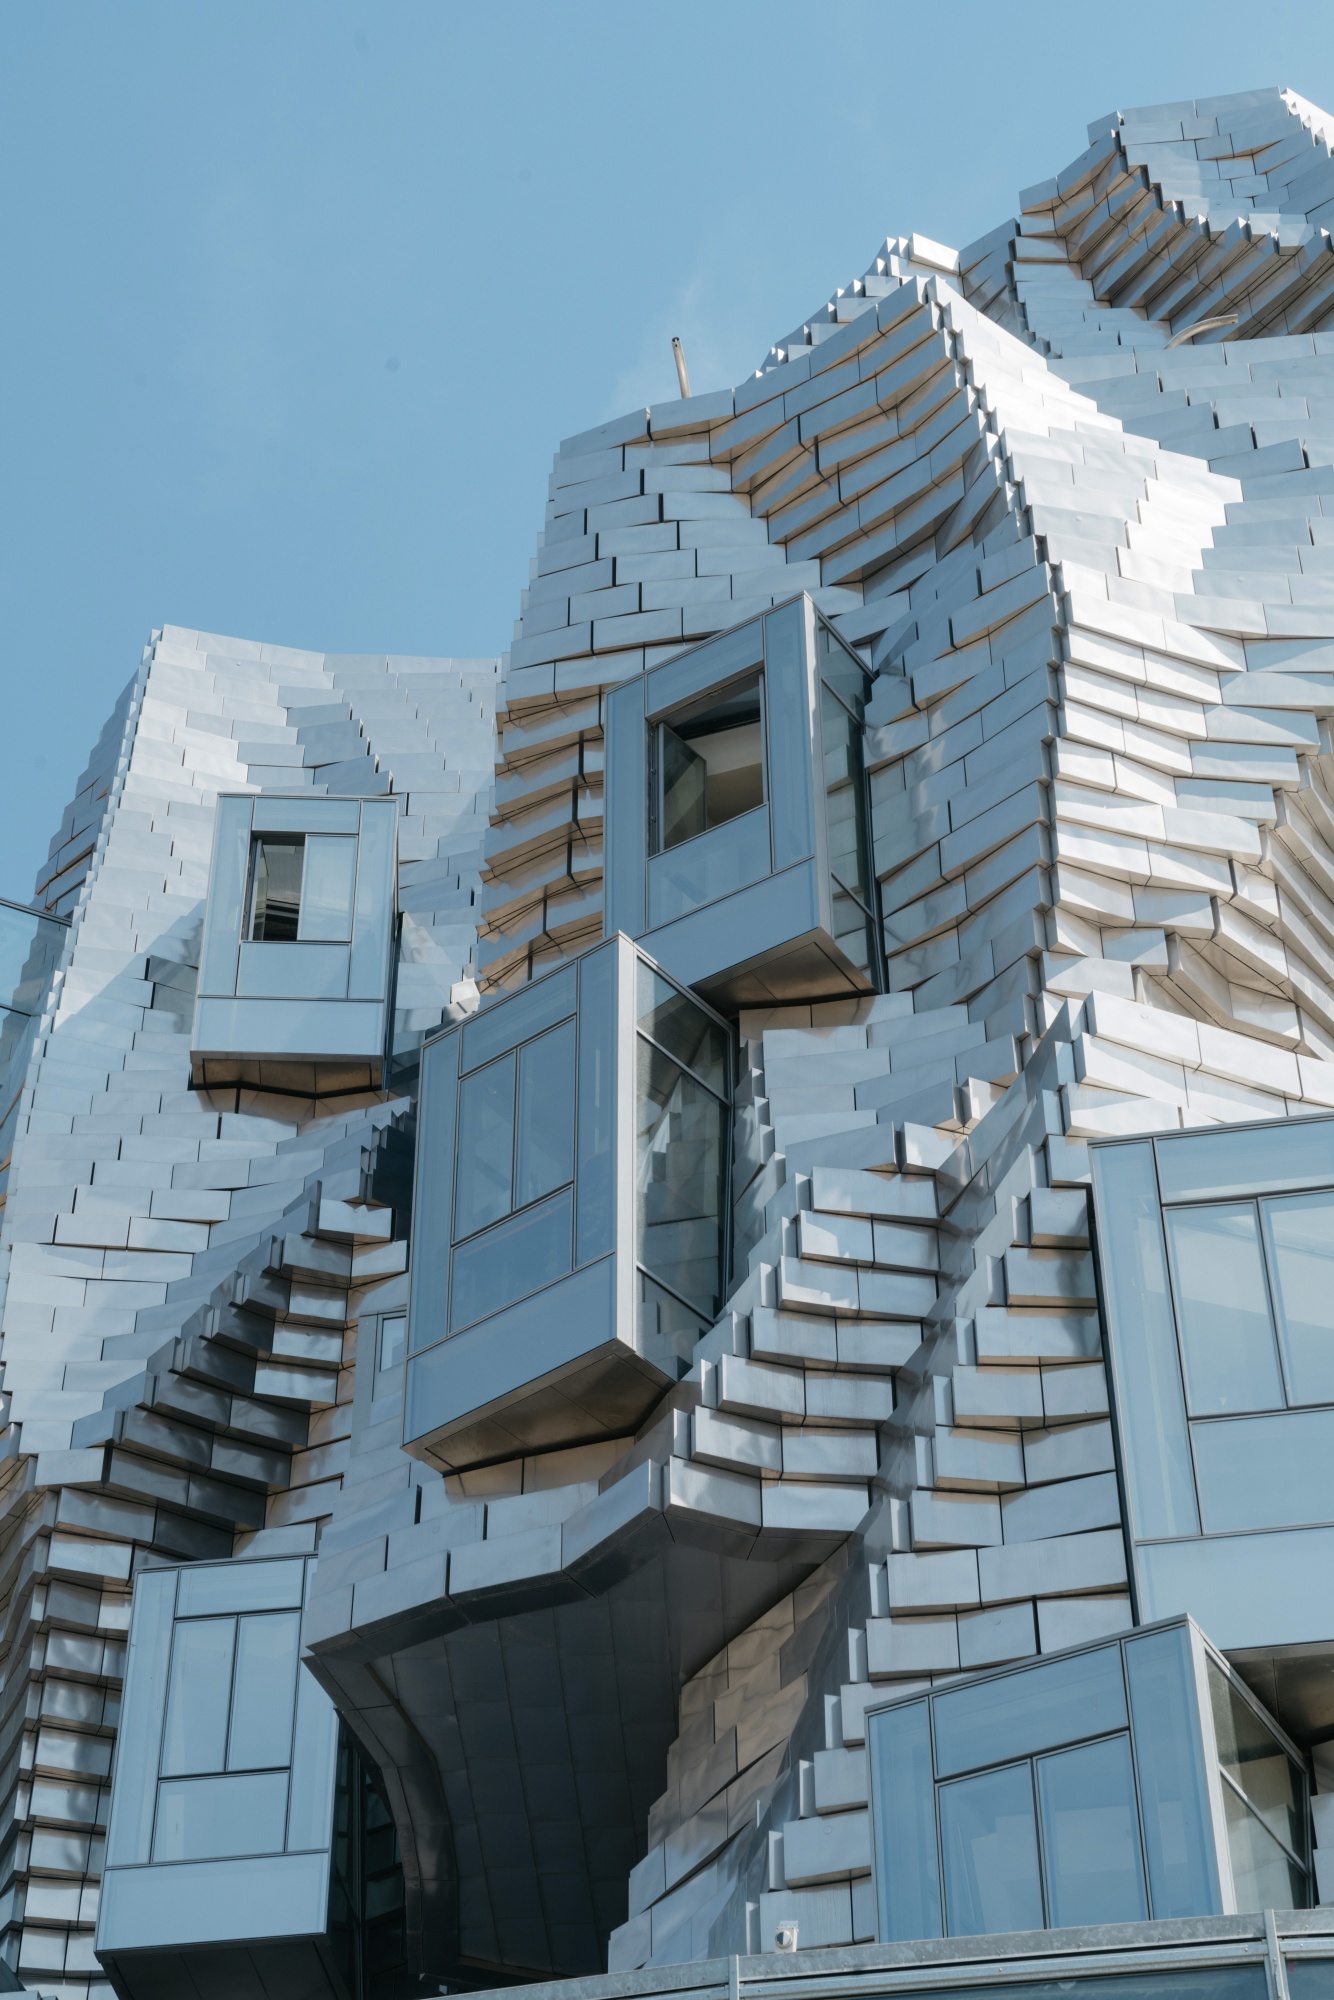 Frank Gehry's Dynamic Reflective Tower Opens to the Public for the First  Time